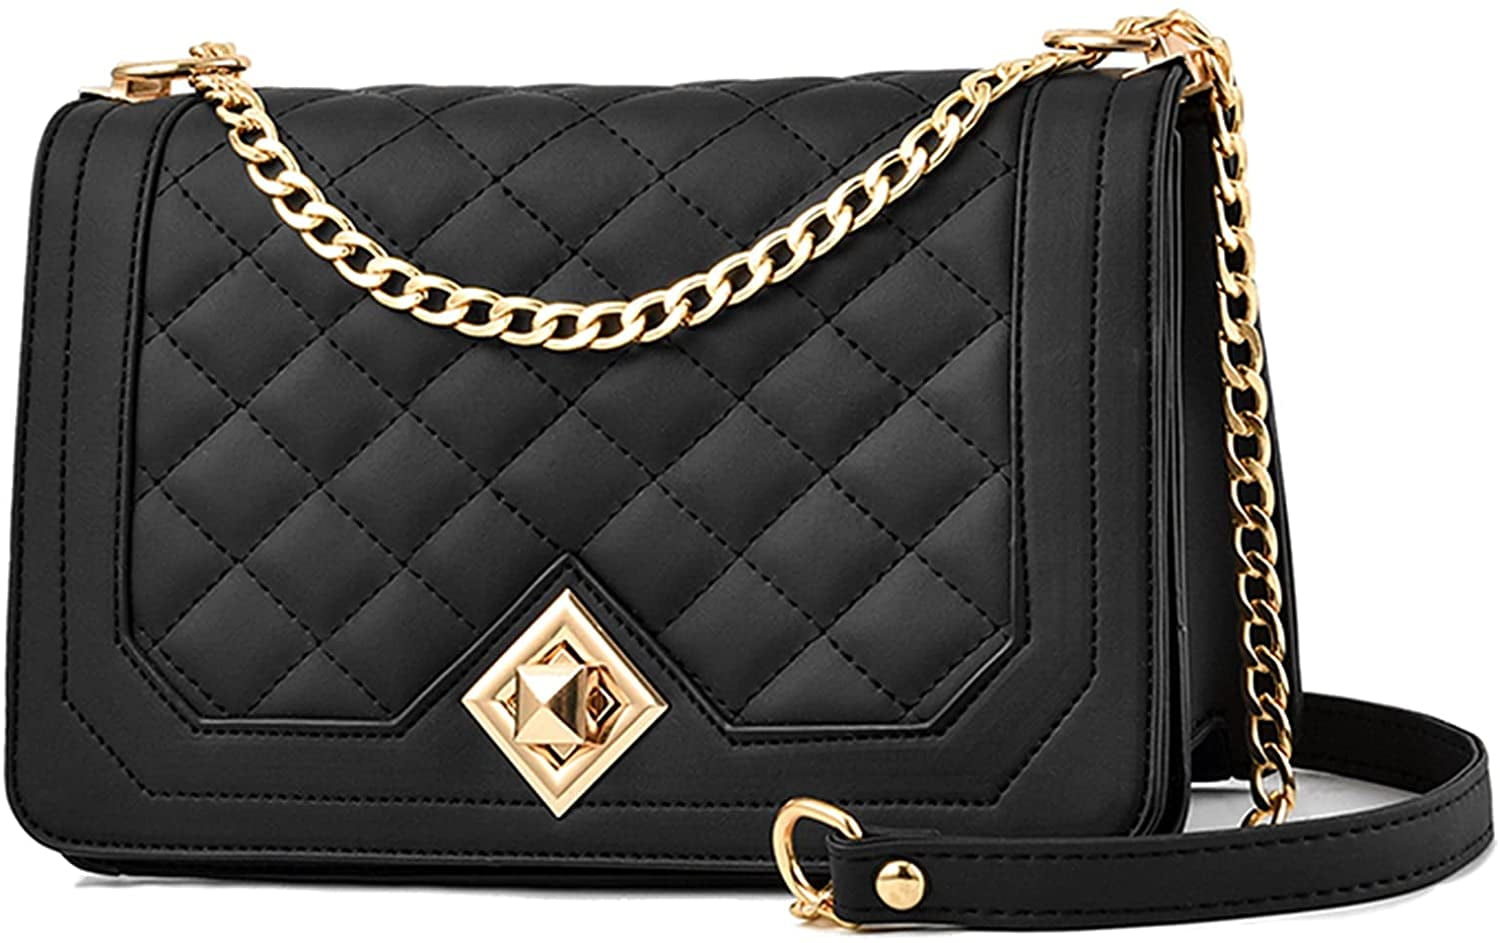 Flap style chain shoulder bag Create your own luxurious elegance